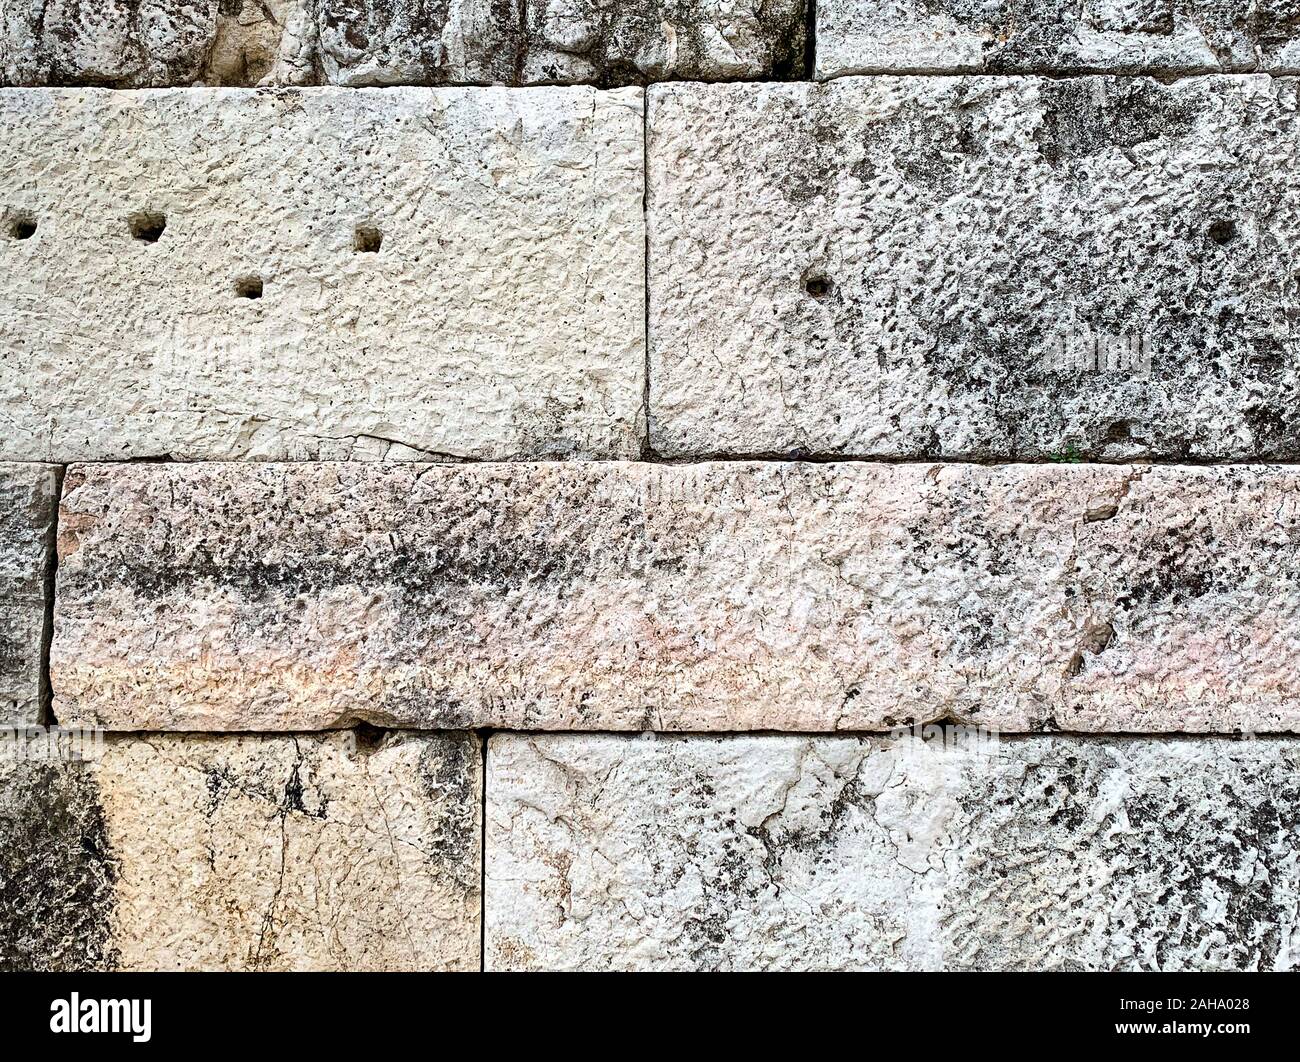 Detail of an ancient stone wall of the Acropolis, Athens, Attica region in Greece. Close-up of huge antique blocks of stone forming a wall. Stock Photo